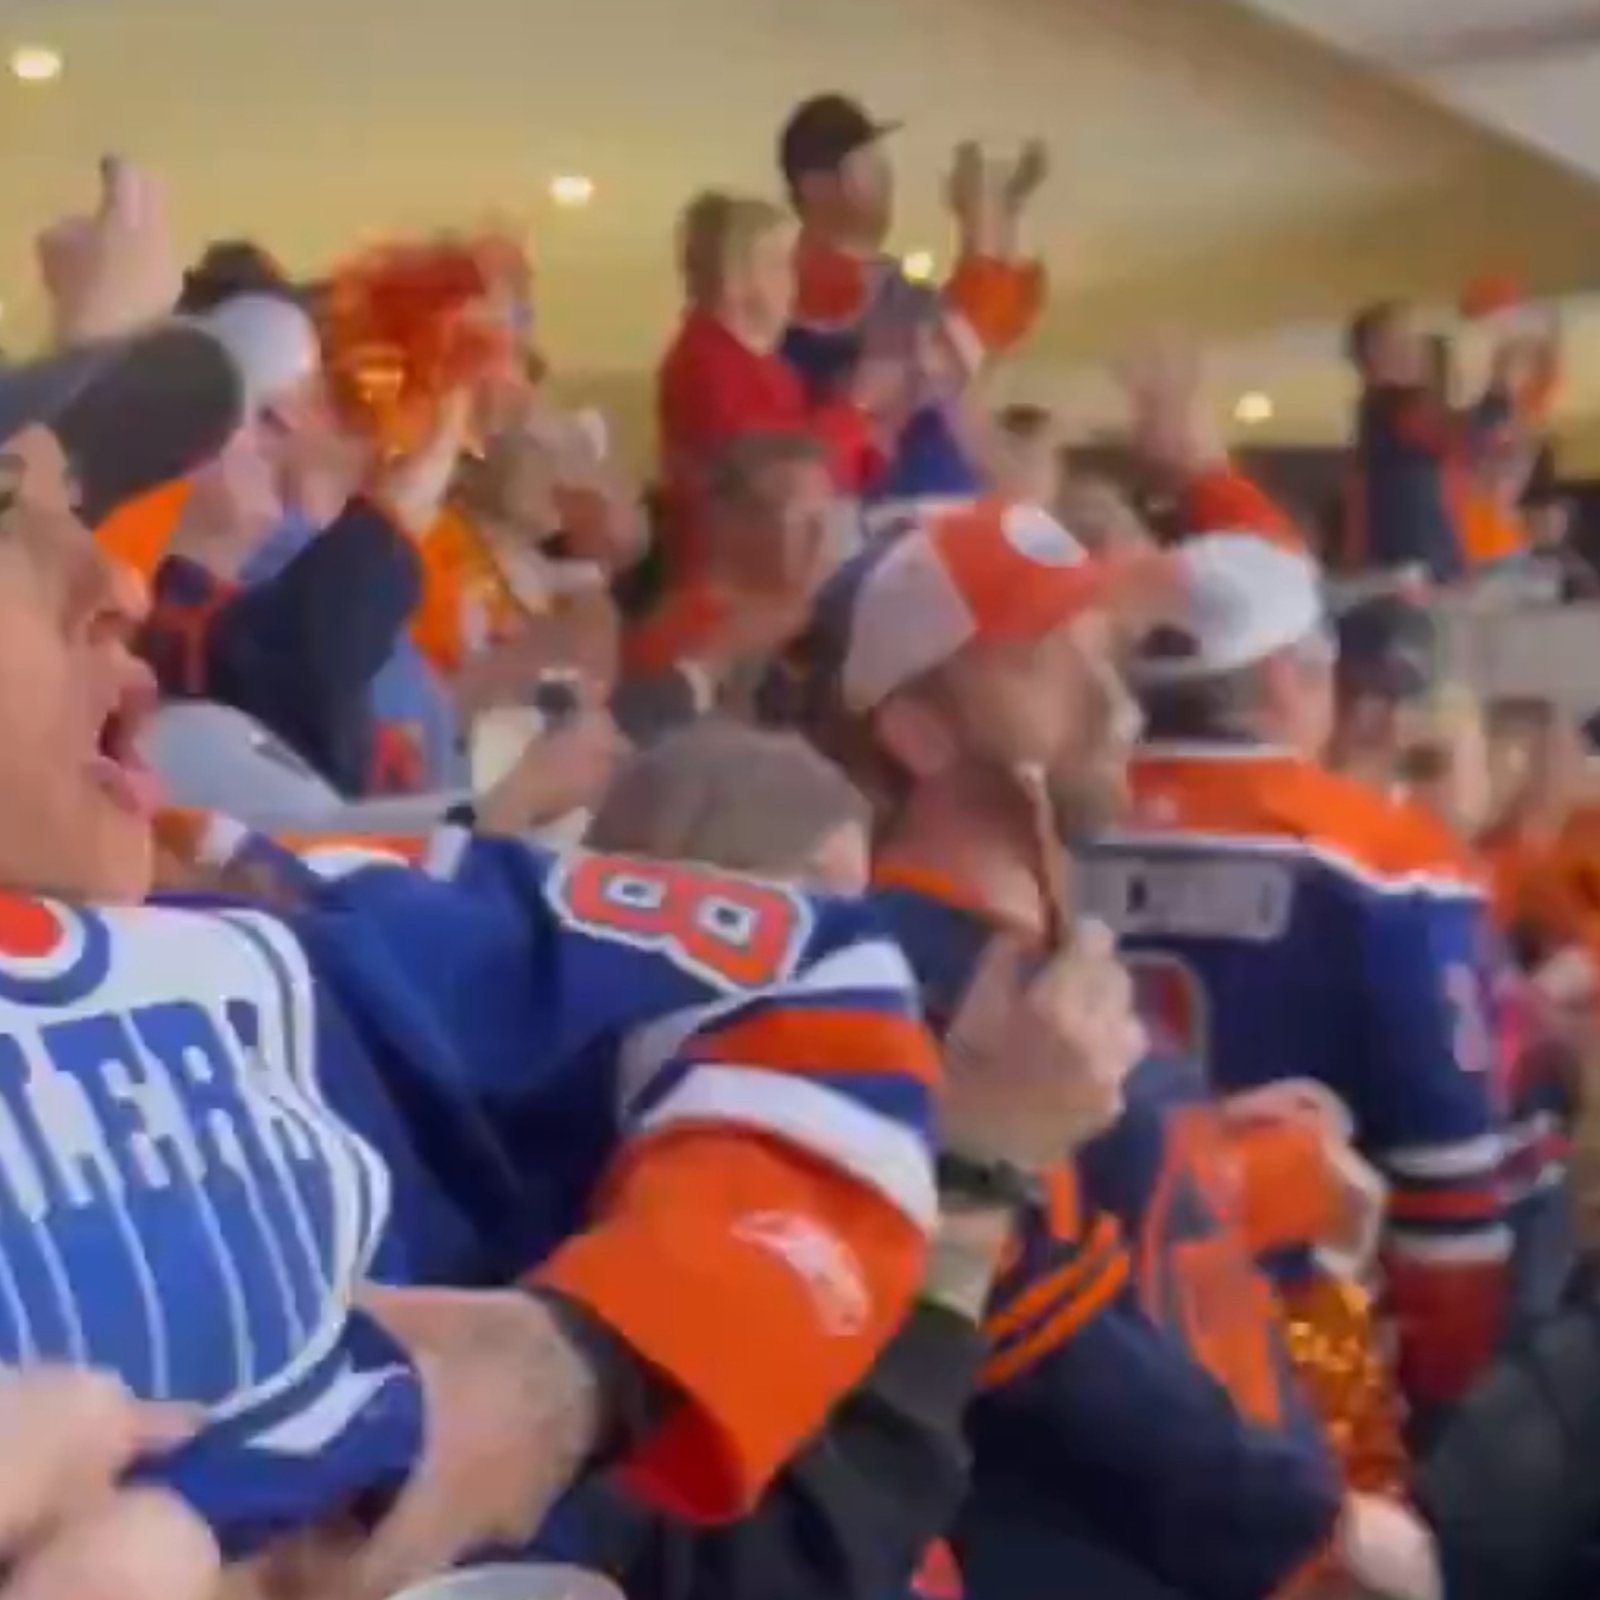 Everyone says the same thing about Oilers’ fan who flashed the crowd in Edmonton as we head into SCF